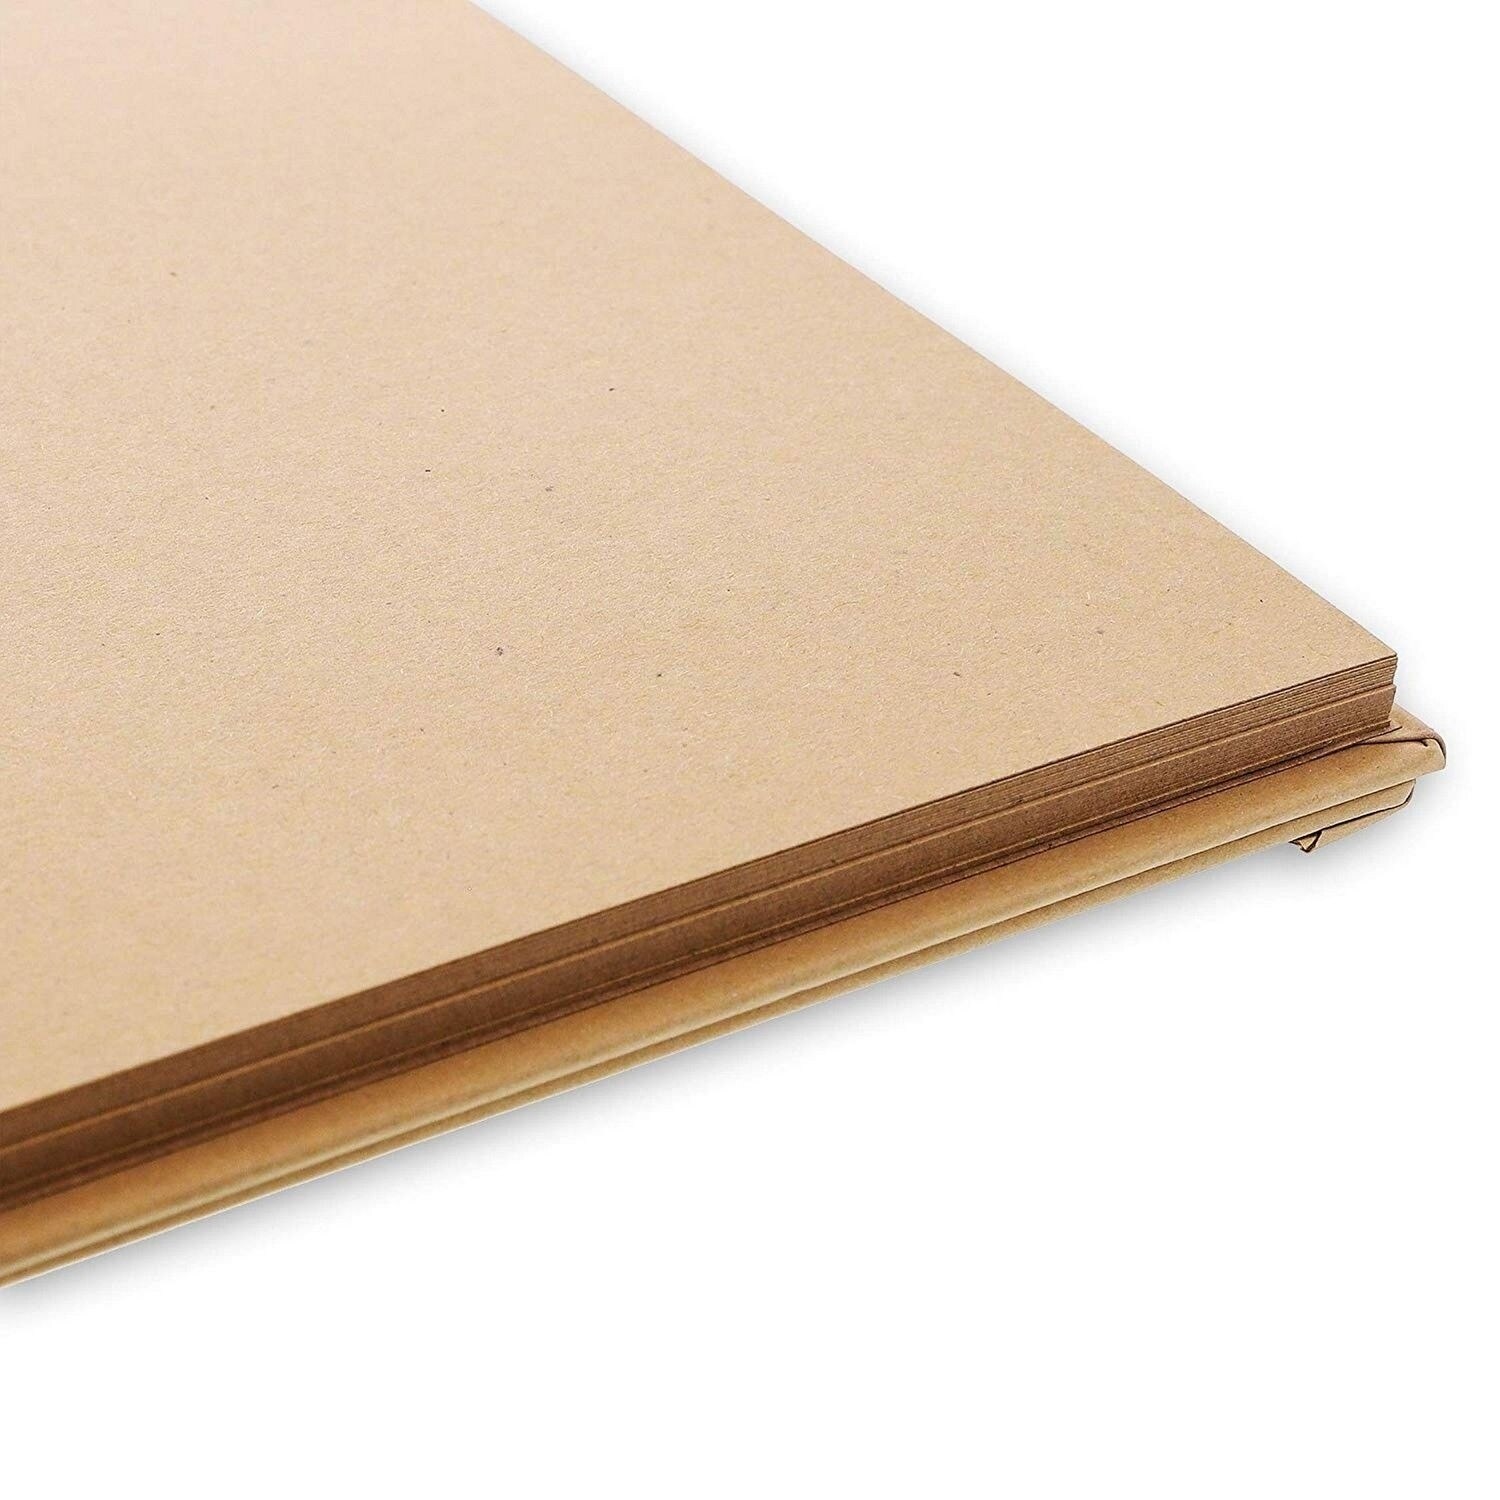 12x12 Scrapbook Album Hardcover (Blank), Kraft Paper Material Spiral Bound  Sketchbook for Drawing, Writing, Arts and Crafts Projects, Home, Office,  School (40 Sheets Total)